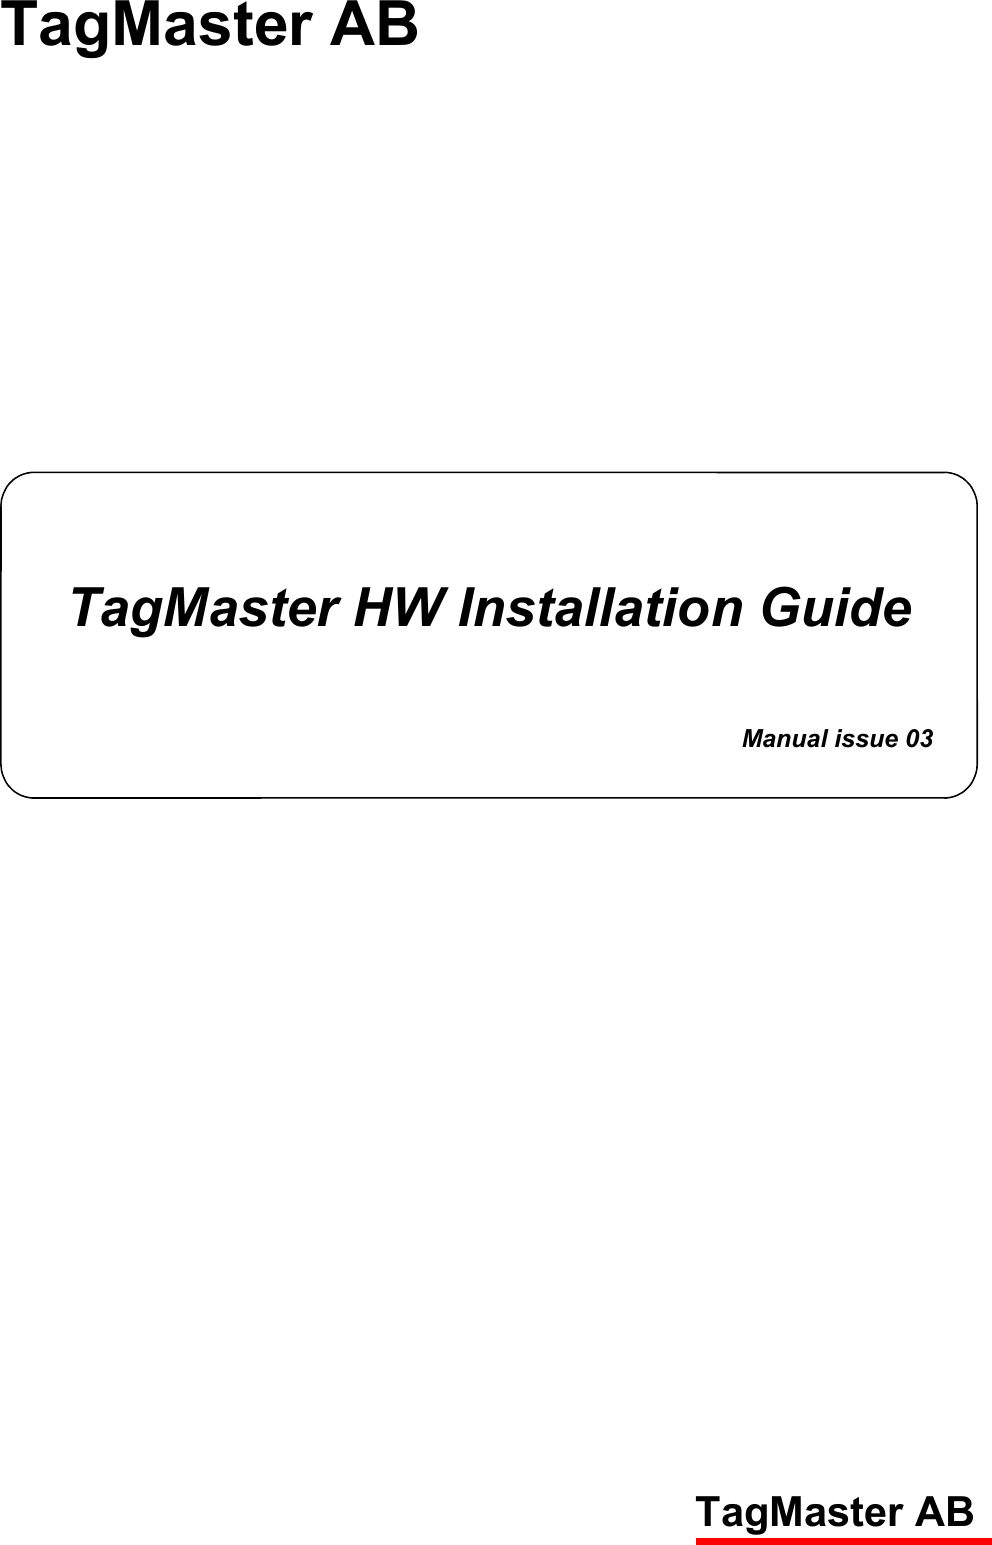 TagMaster AB  TagMaster AB    TagMaster HW Installation Guide Manual issue 03 